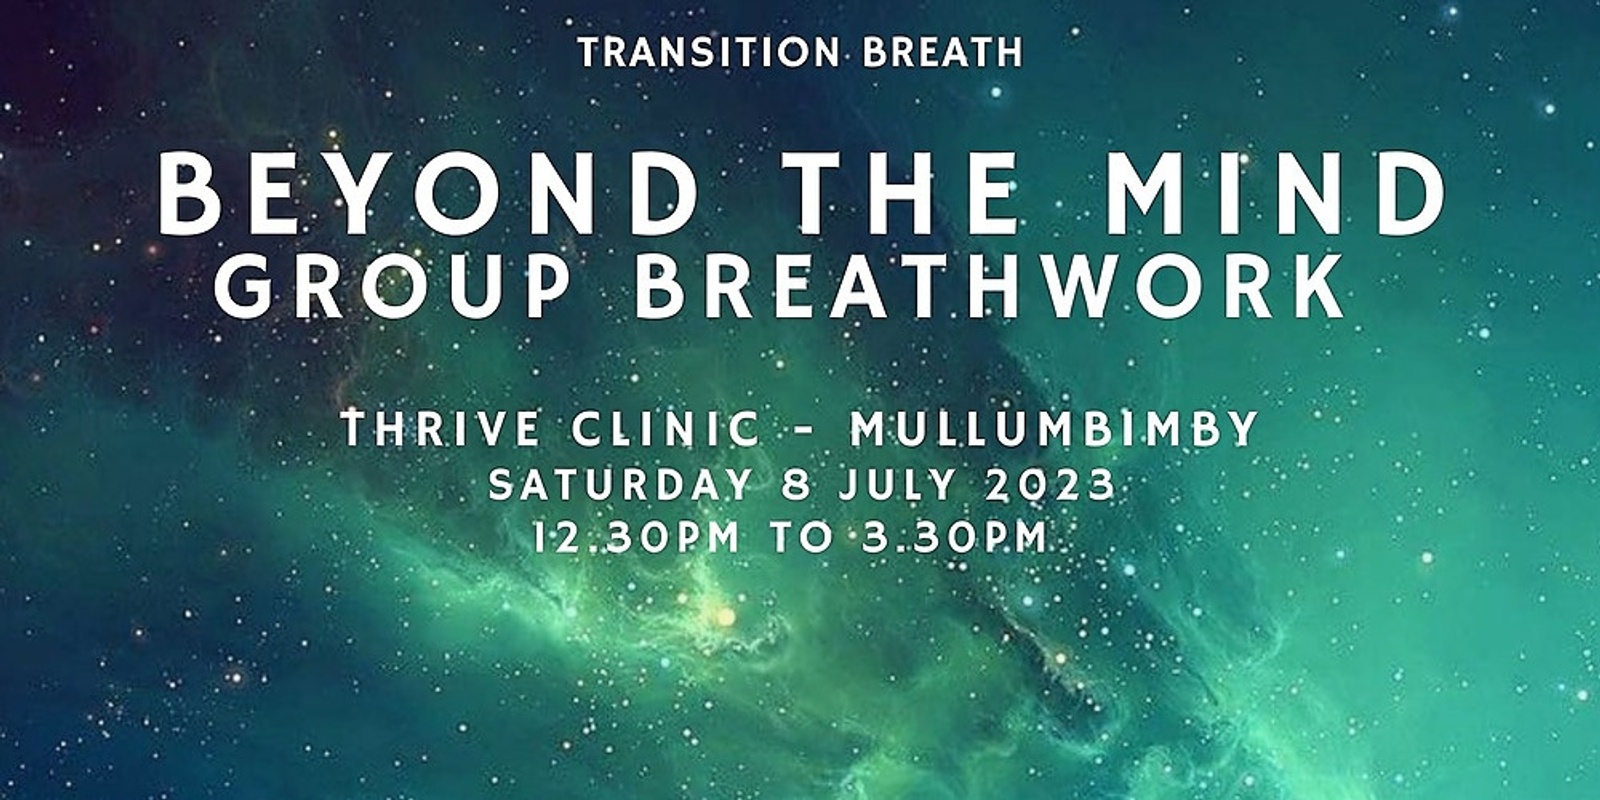 Banner image for Beyond the mind: A group breathwork gathering